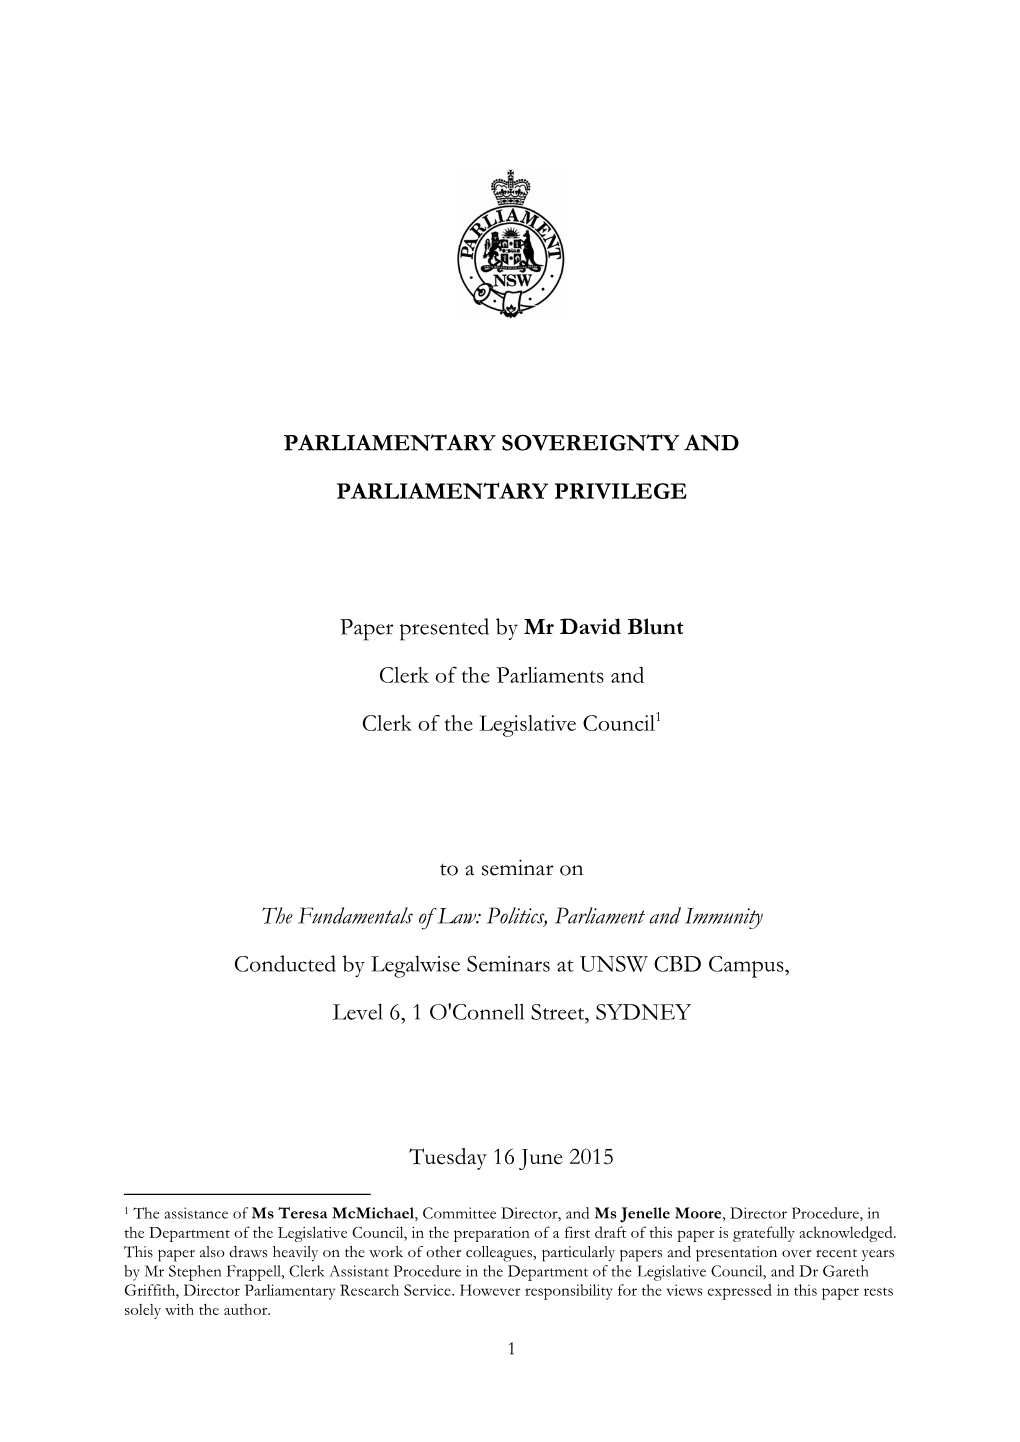 PARLIAMENTARY SOVEREIGNTY and PARLIAMENTARY PRIVILEGE Paper Presented by Mr David Blunt Clerk of the Parliaments and Clerk of T